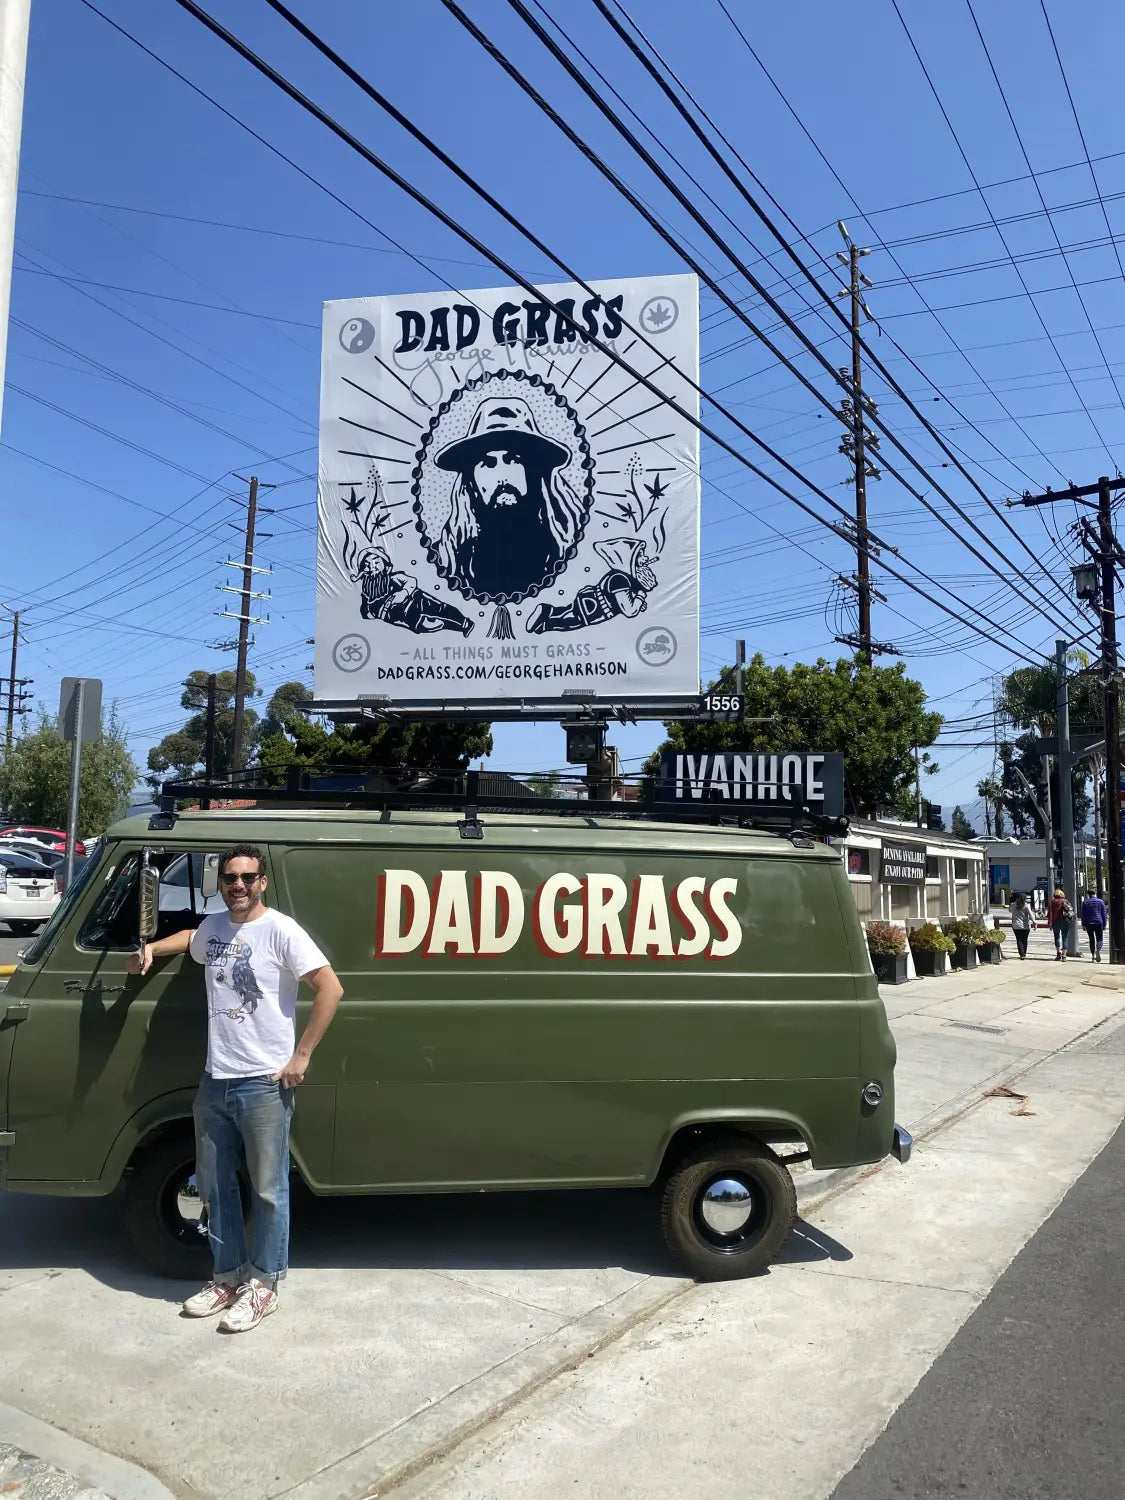 Father’s Day Feature: Ben Starmer from Dad Grass. Let’s Hear it for the Dads!